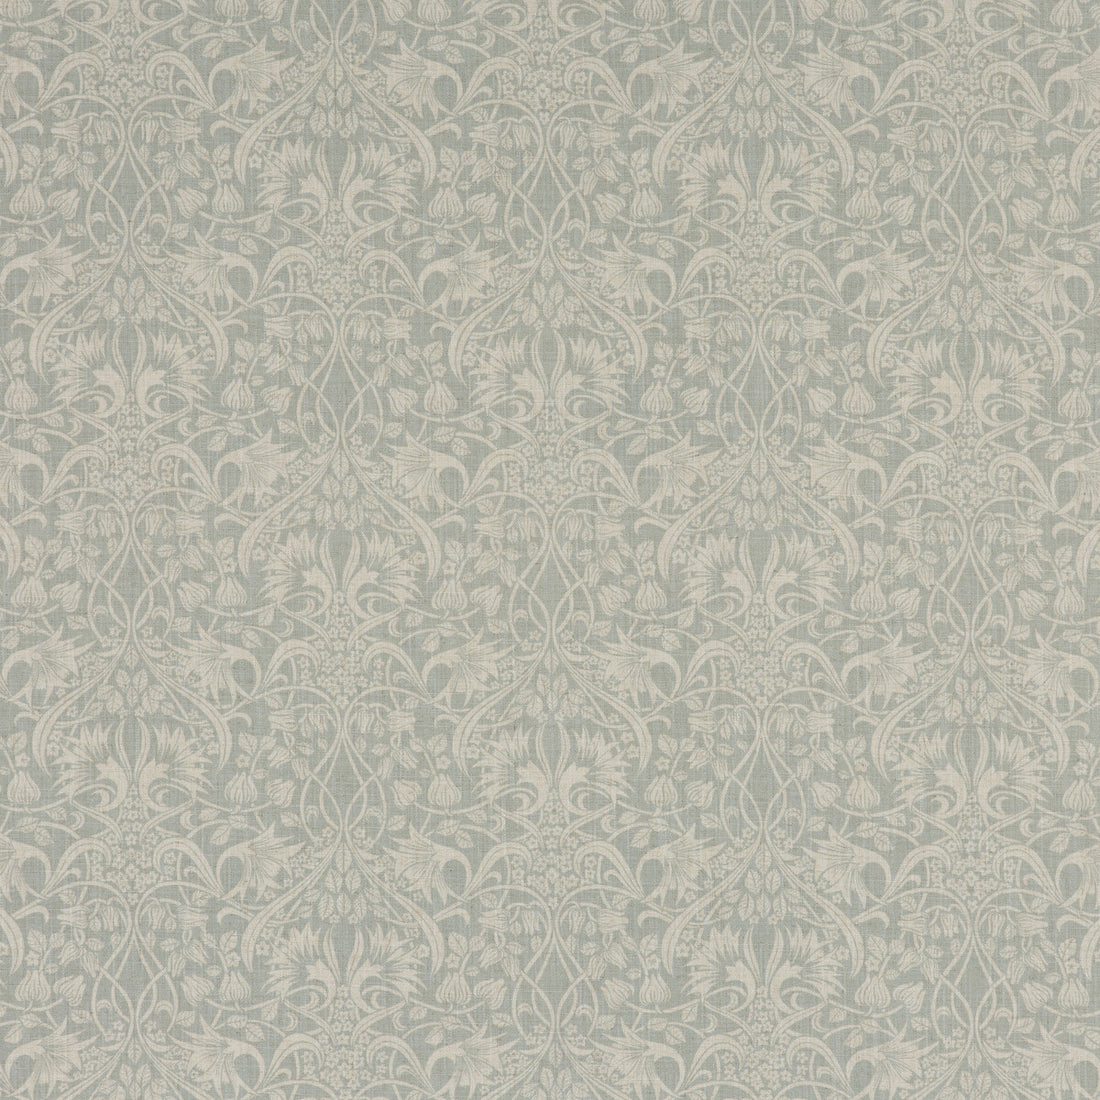 Fritillerie fabric in aqua color - pattern BP10620.2.0 - by G P &amp; J Baker in the Originals V collection